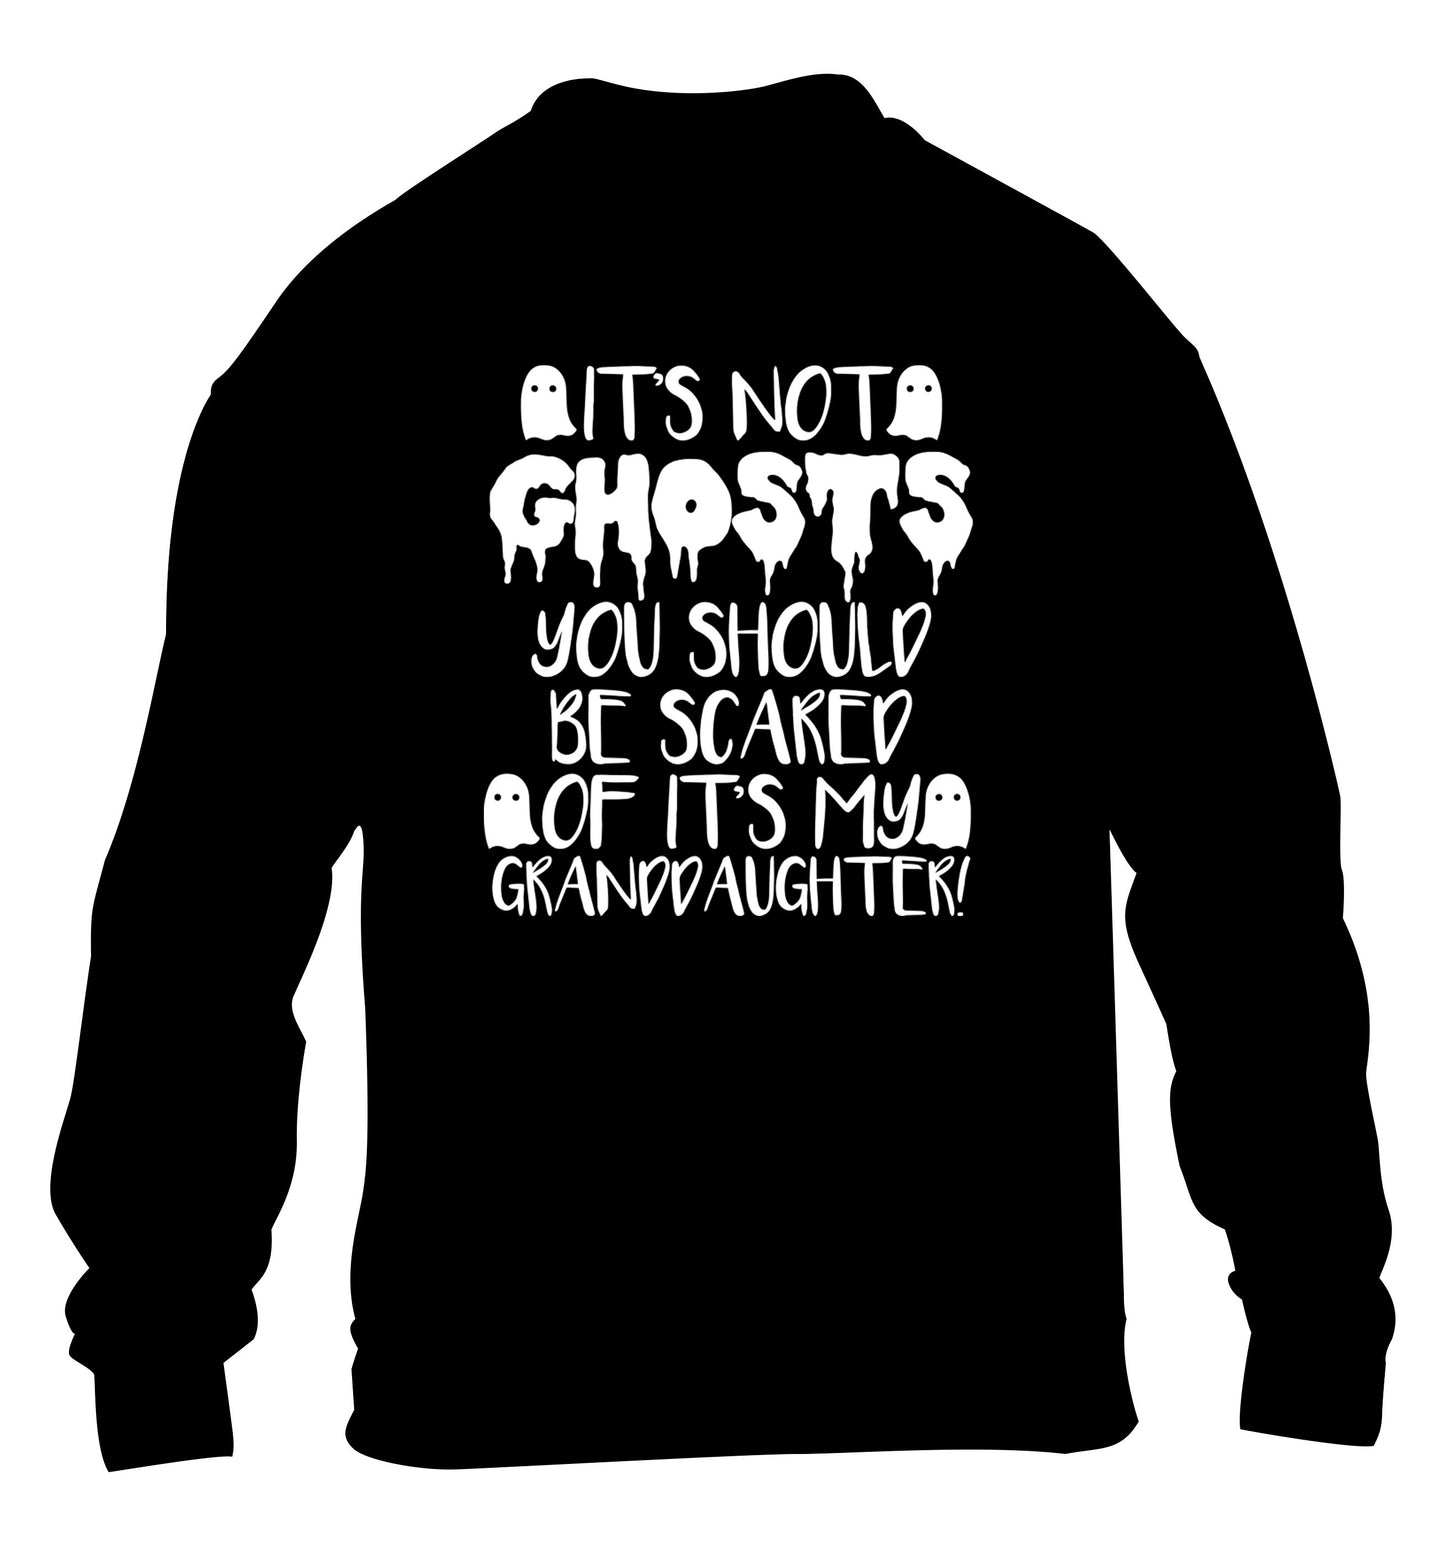 It's not ghosts you should be scared of it's my granddaughter! children's black sweater 12-14 Years